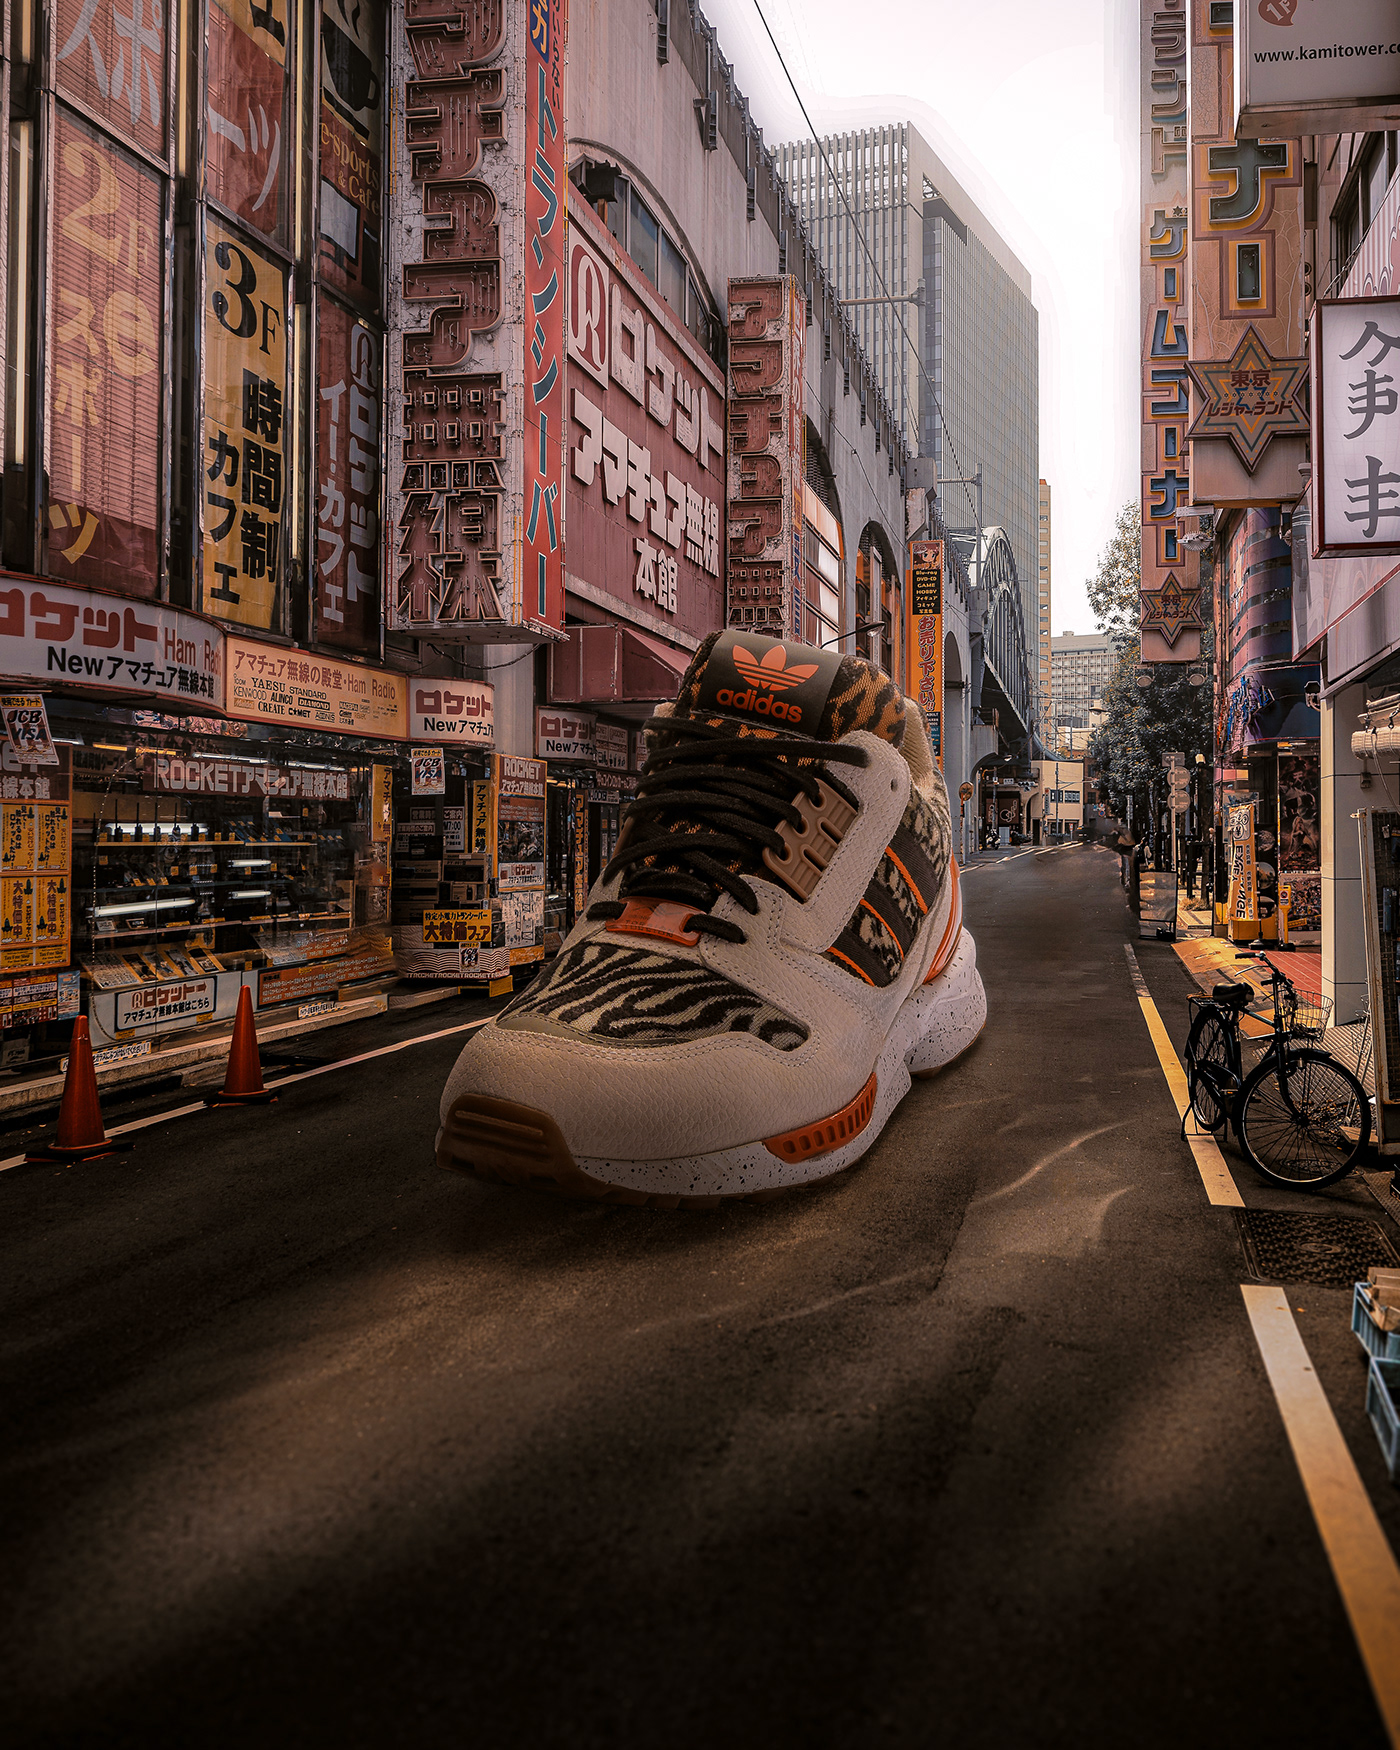 Giant sneaker photo composite in Tokyo. Retouching using Photoshop